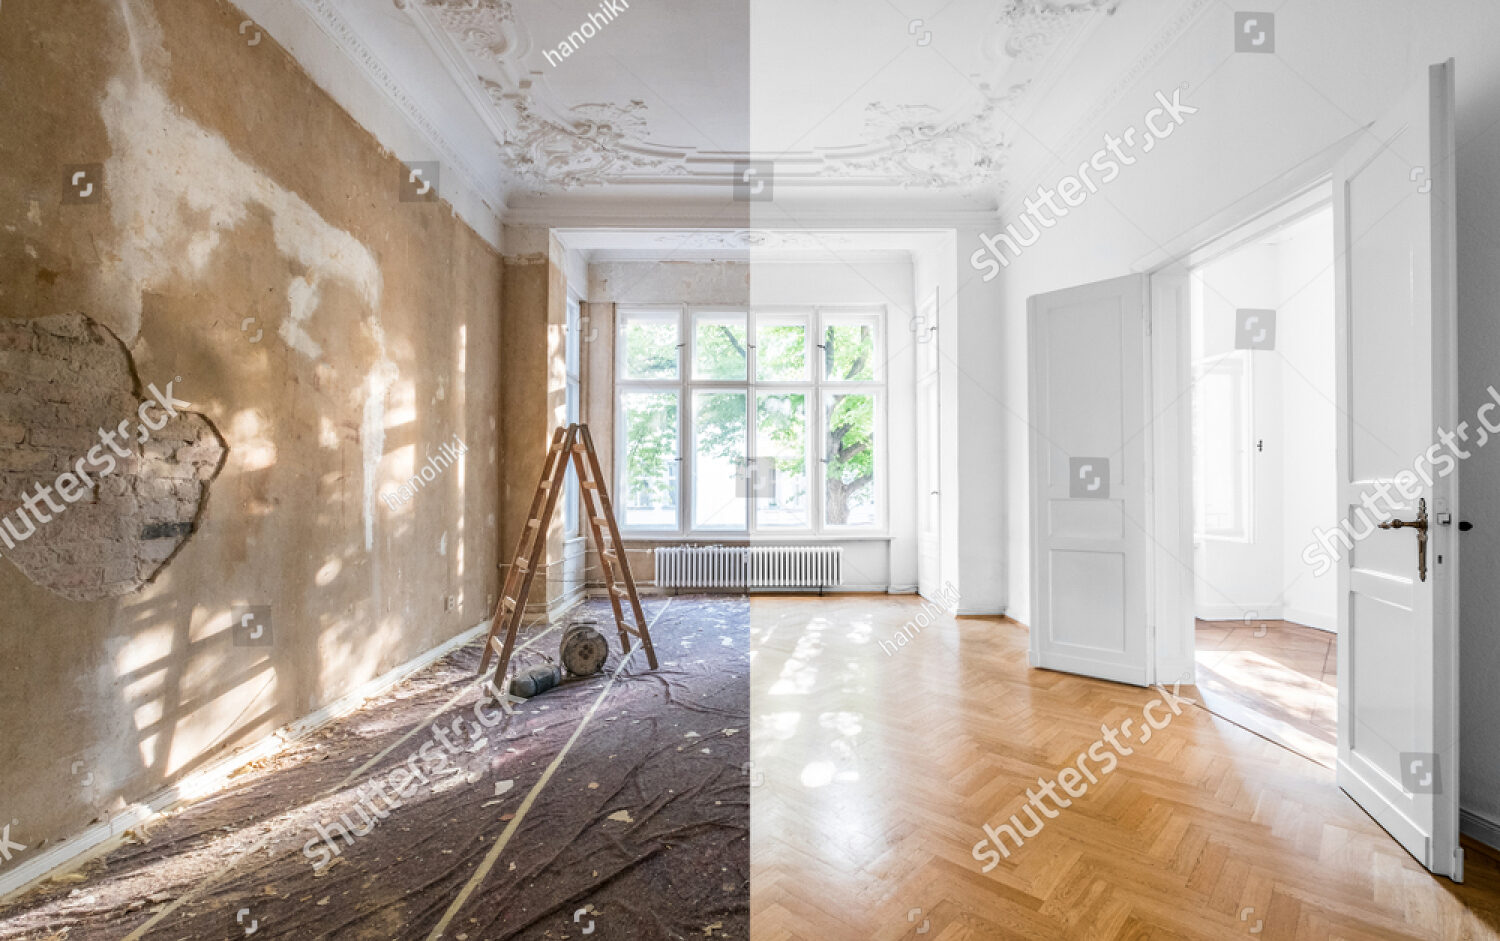 stock-photo-renovation-concept-apartment-before-and-after-restoration-or-refurbishment-1163474824